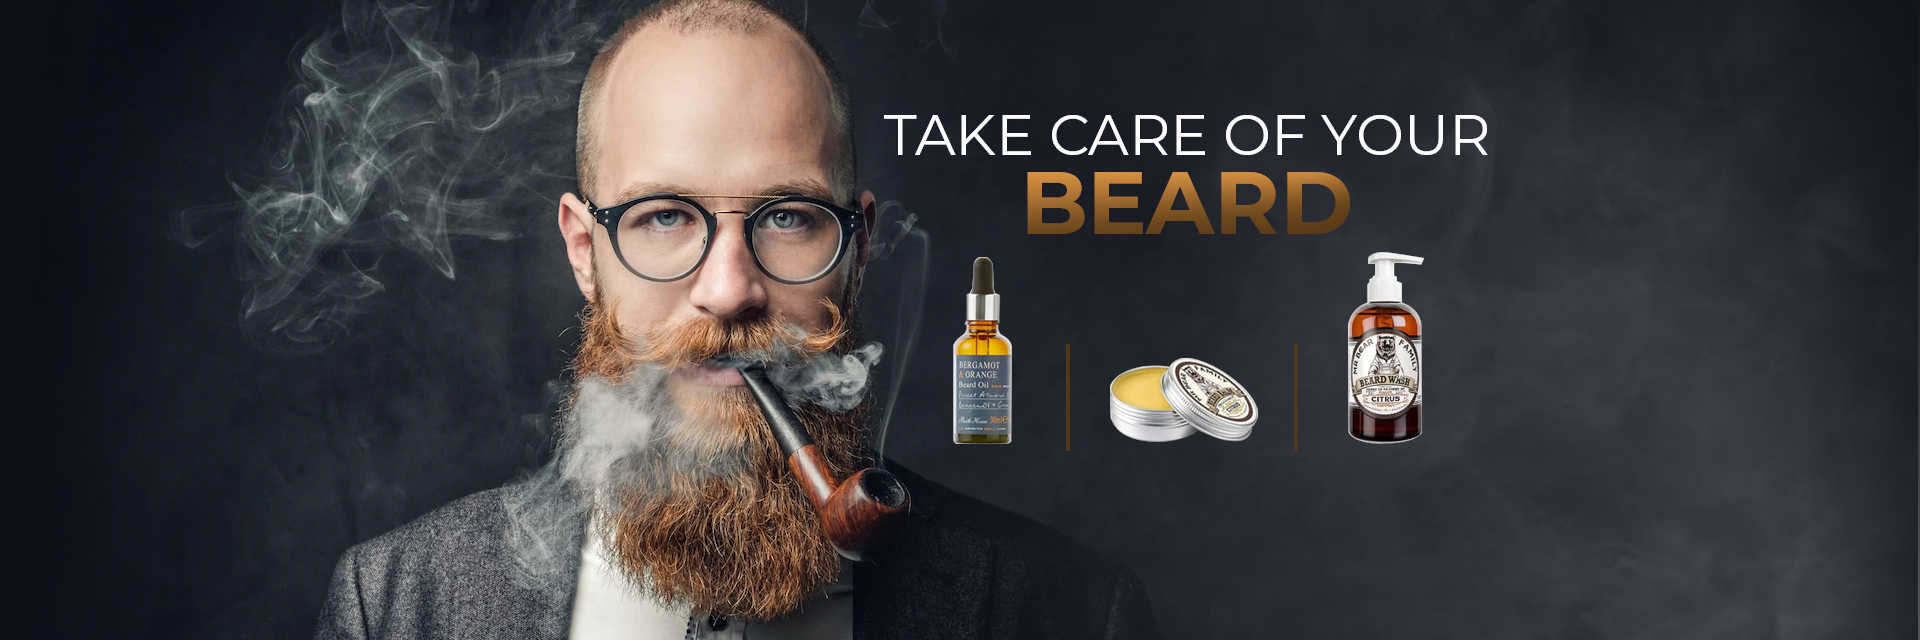 Buy now your favorite beard products